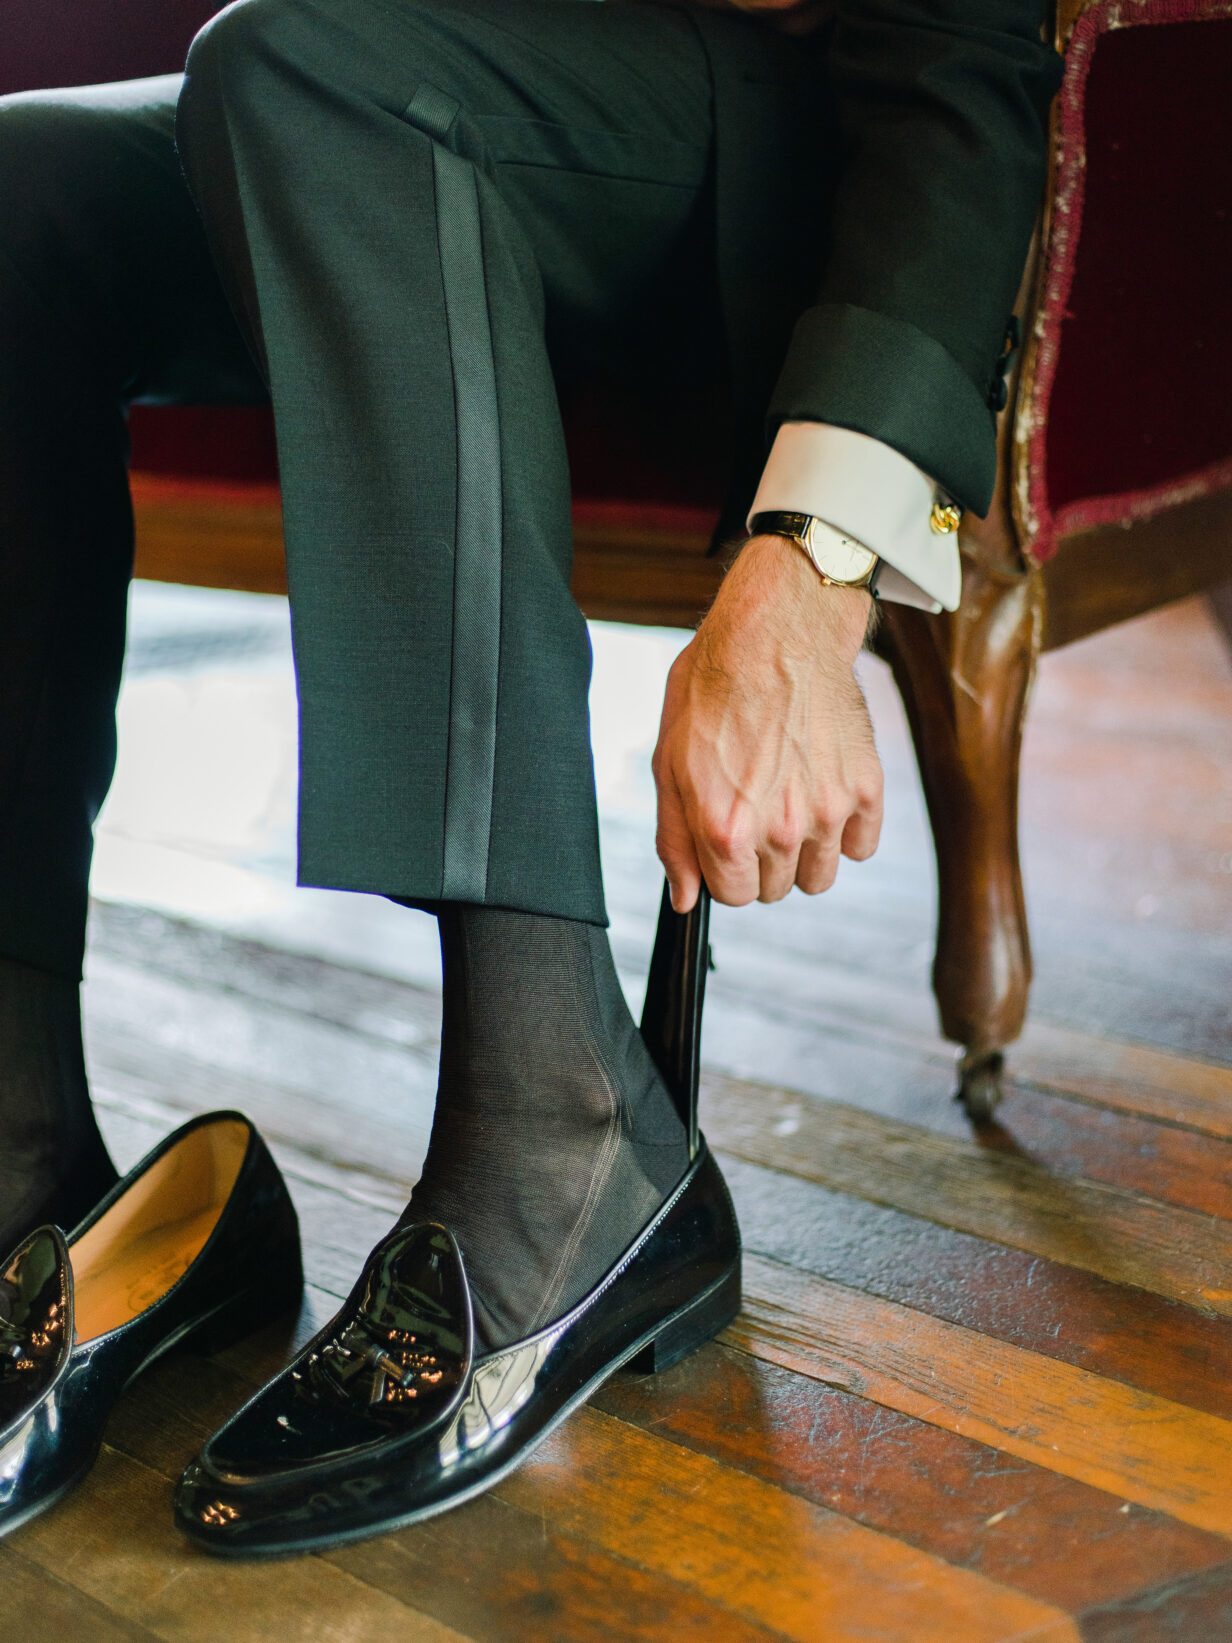 How to wear formal shoes with jeans - The Cheaney Journal